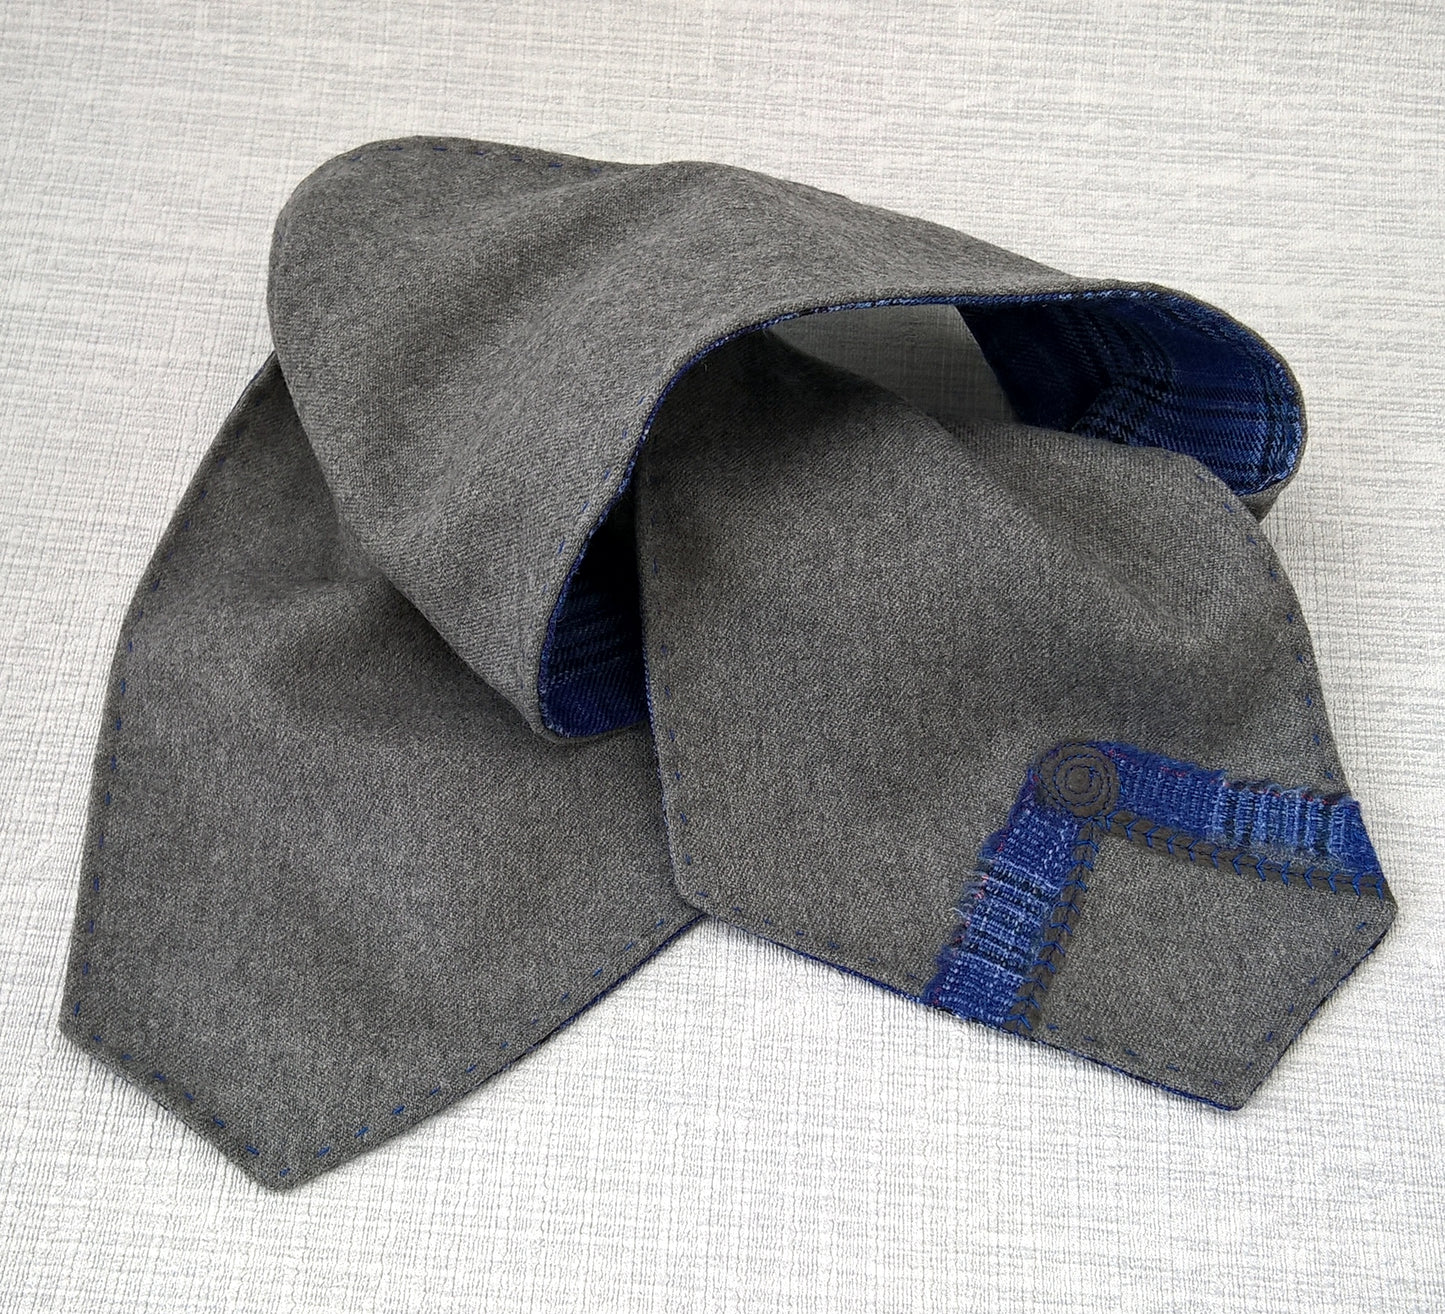 Blue & grey wool scarf with felted detail